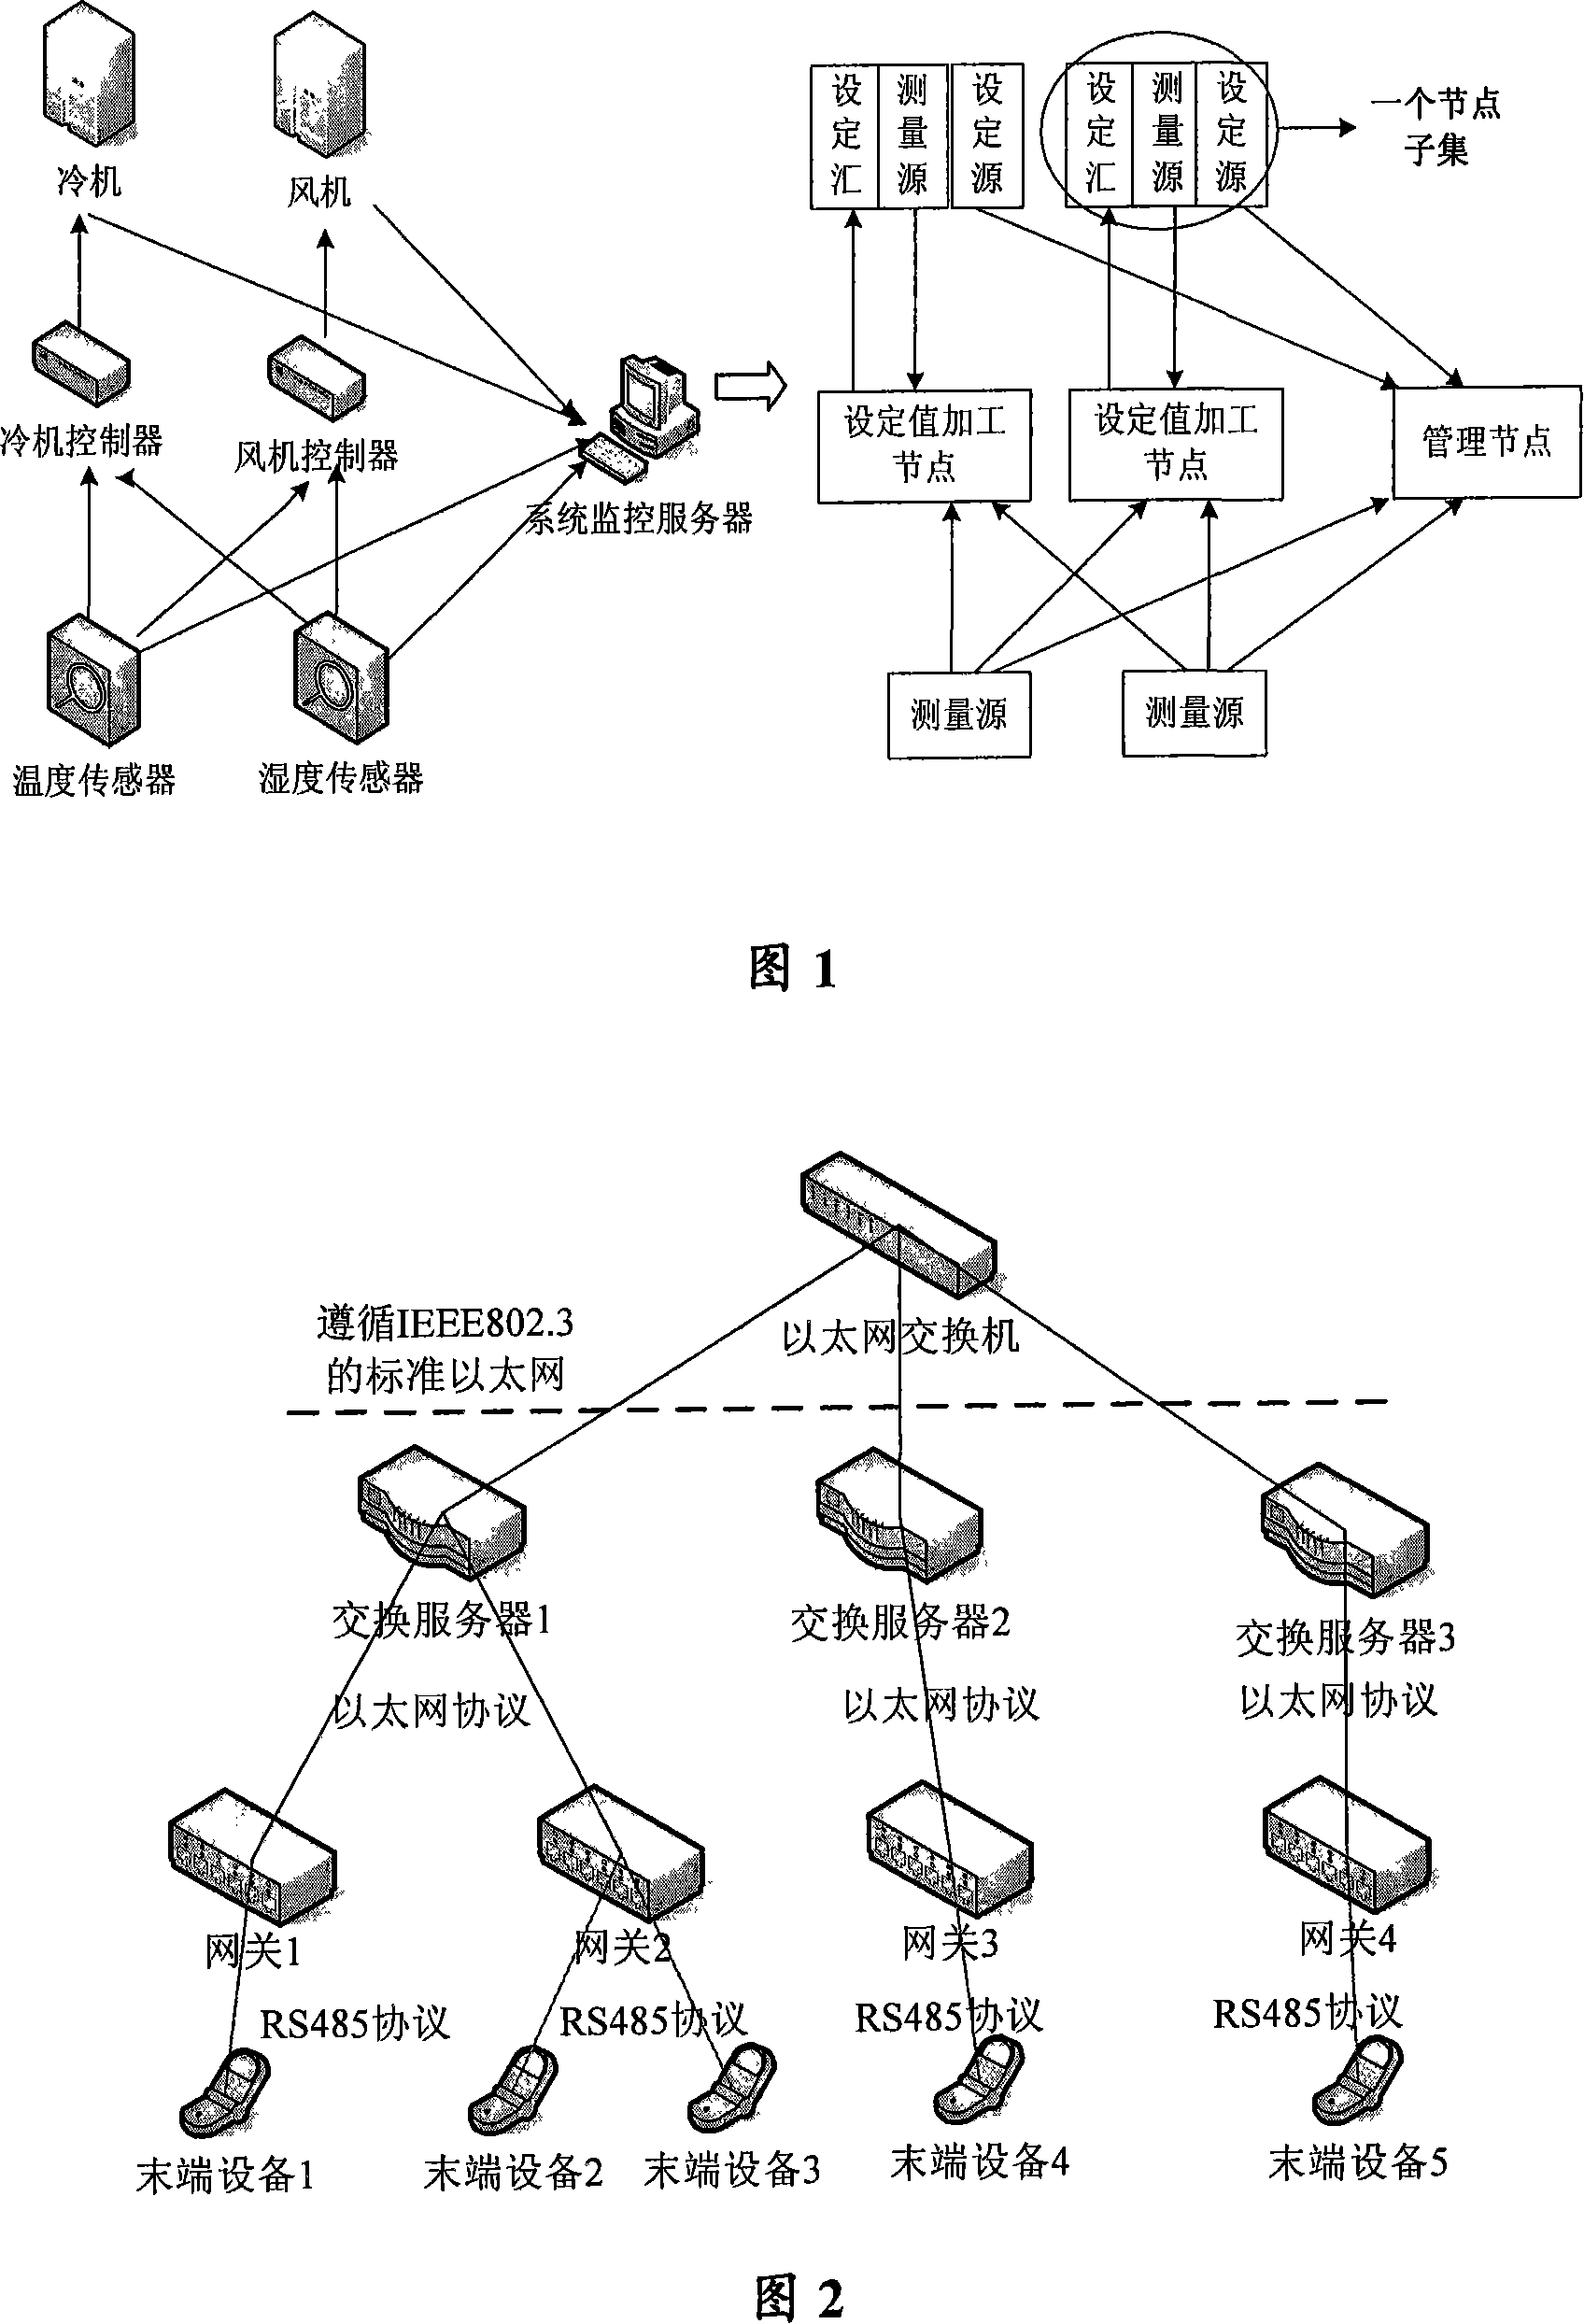 Data addressing and repeating method and system in control network